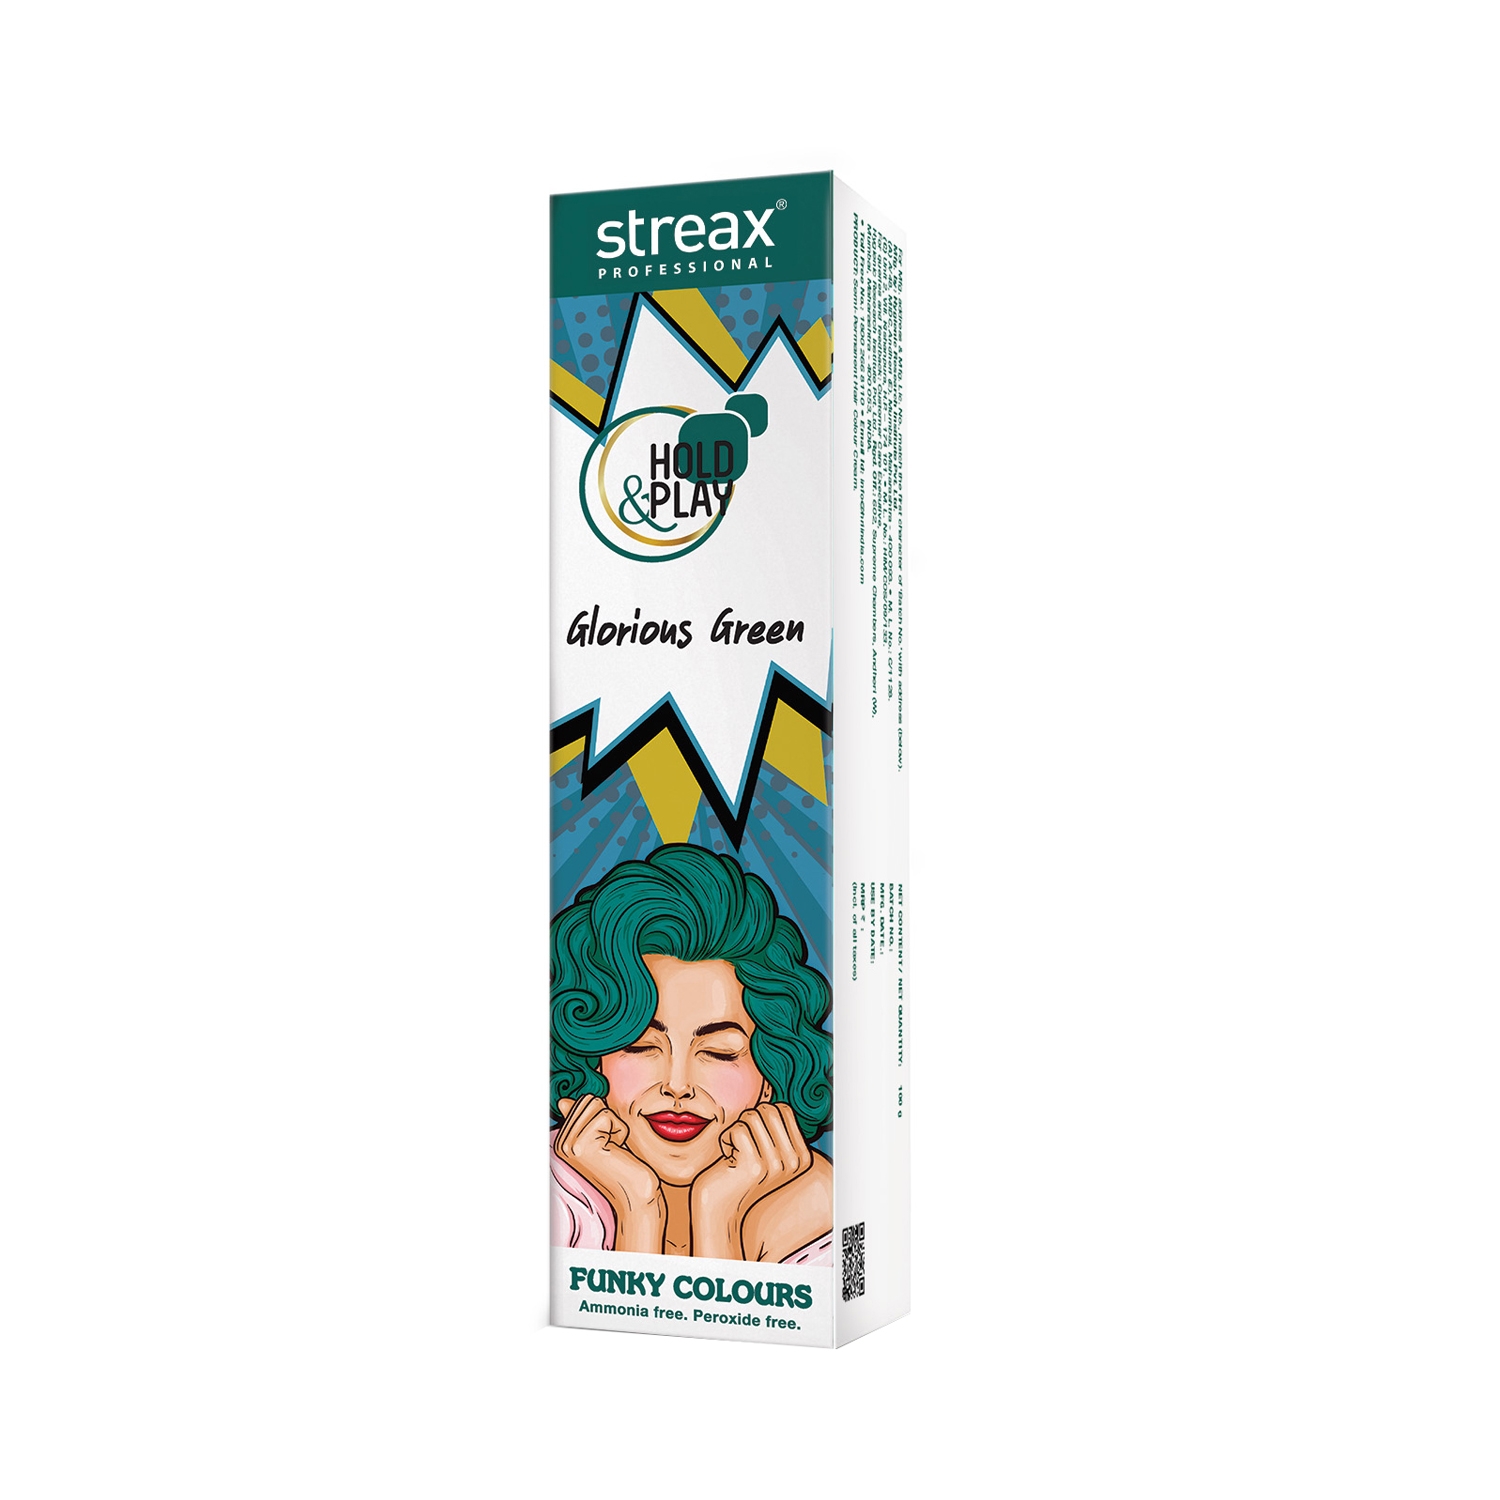 Streax Professional | Streax Professional Hold & Play Funky Hair Color - Glorious Green (100g)